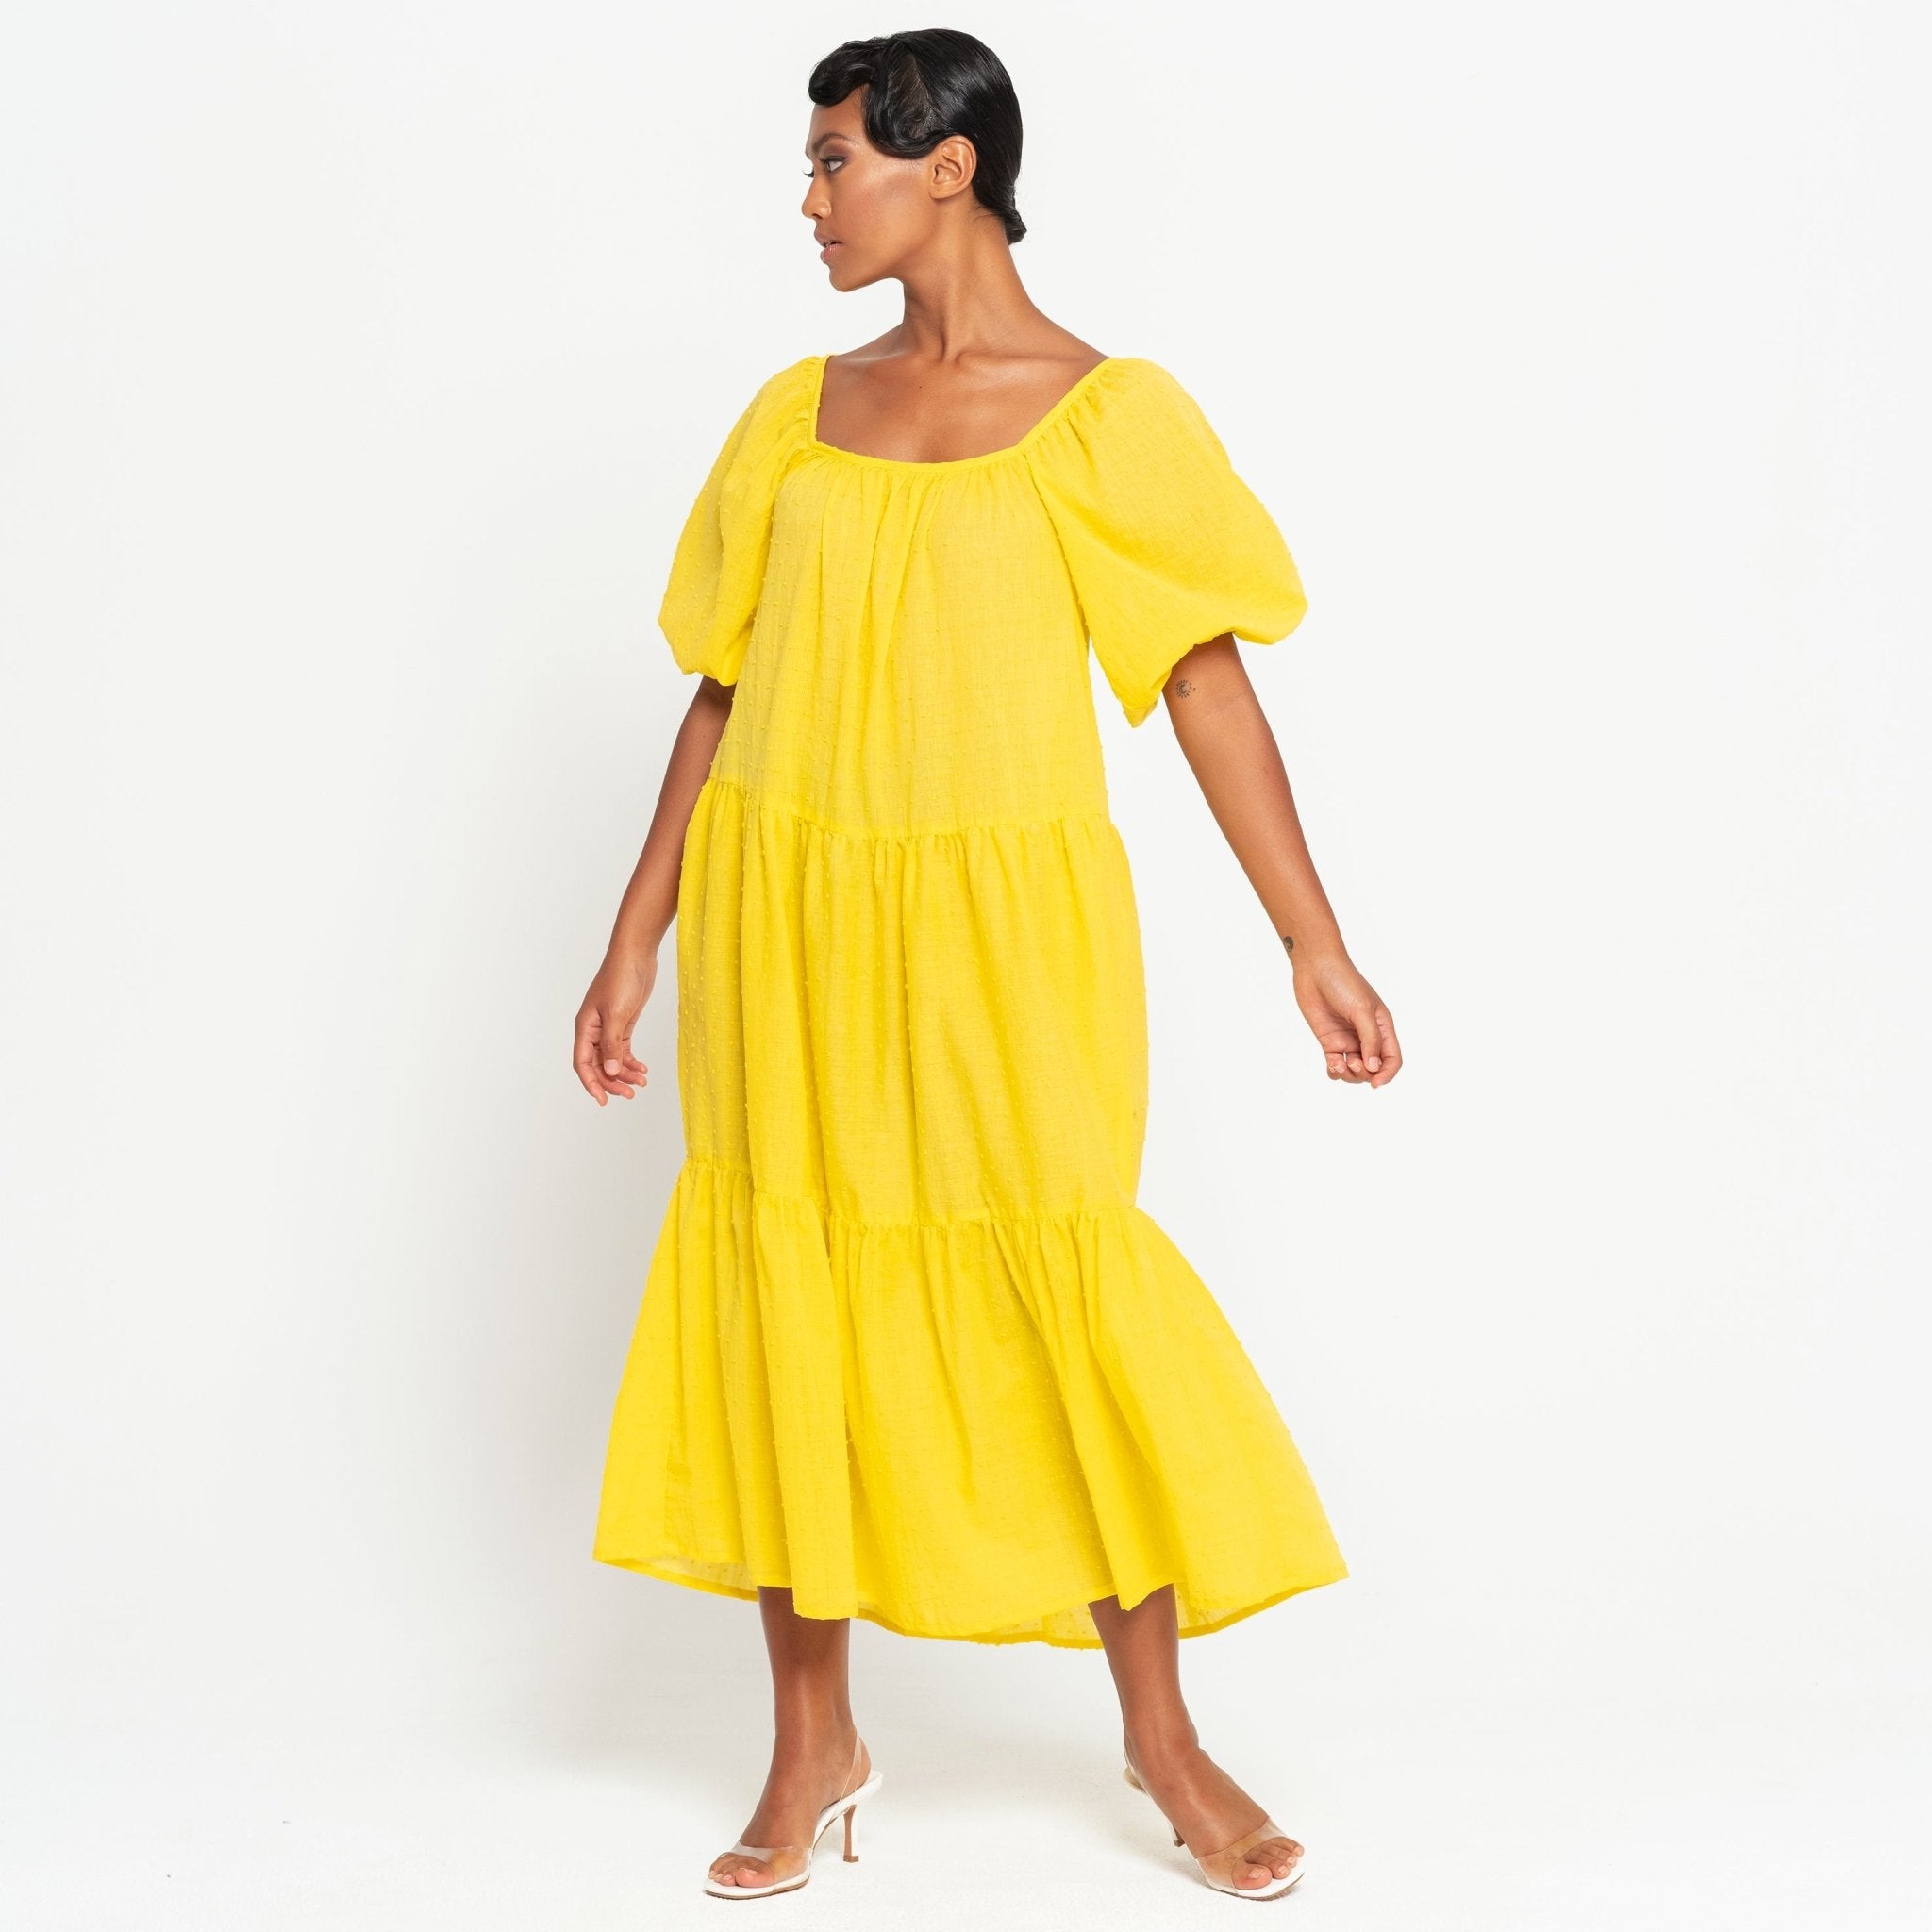 ROSEMARY Dotted Cotton Dress, in Sunflower Yellow - Guy Christopher